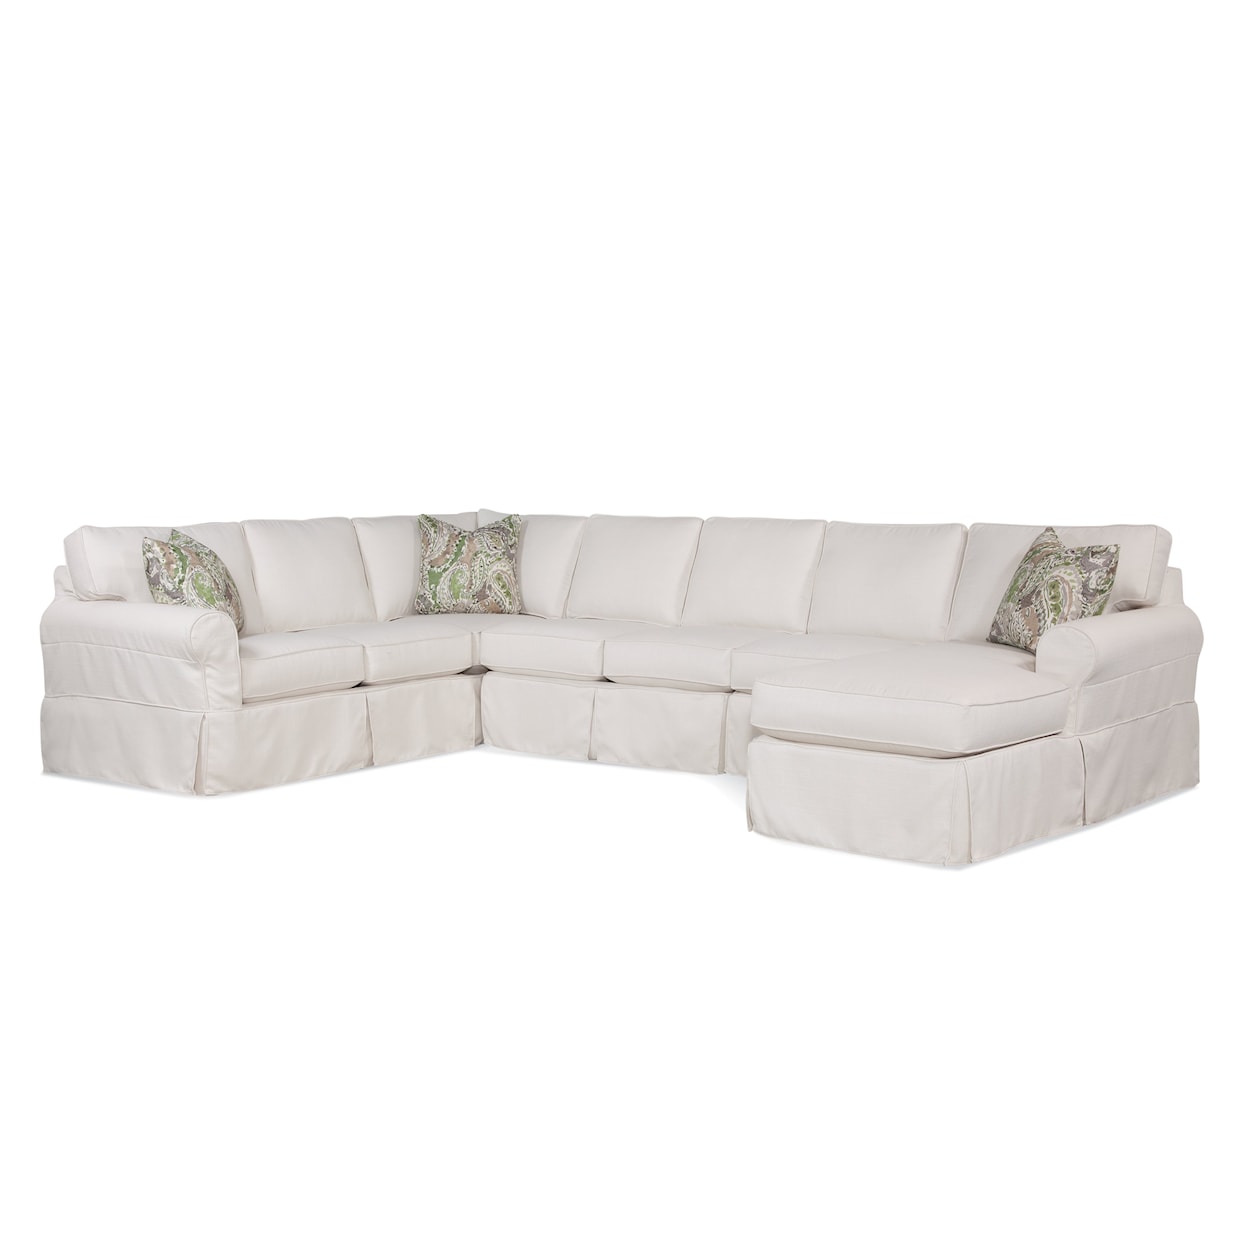 Braxton Culler Bedford 4-Piece Sectional Sofa